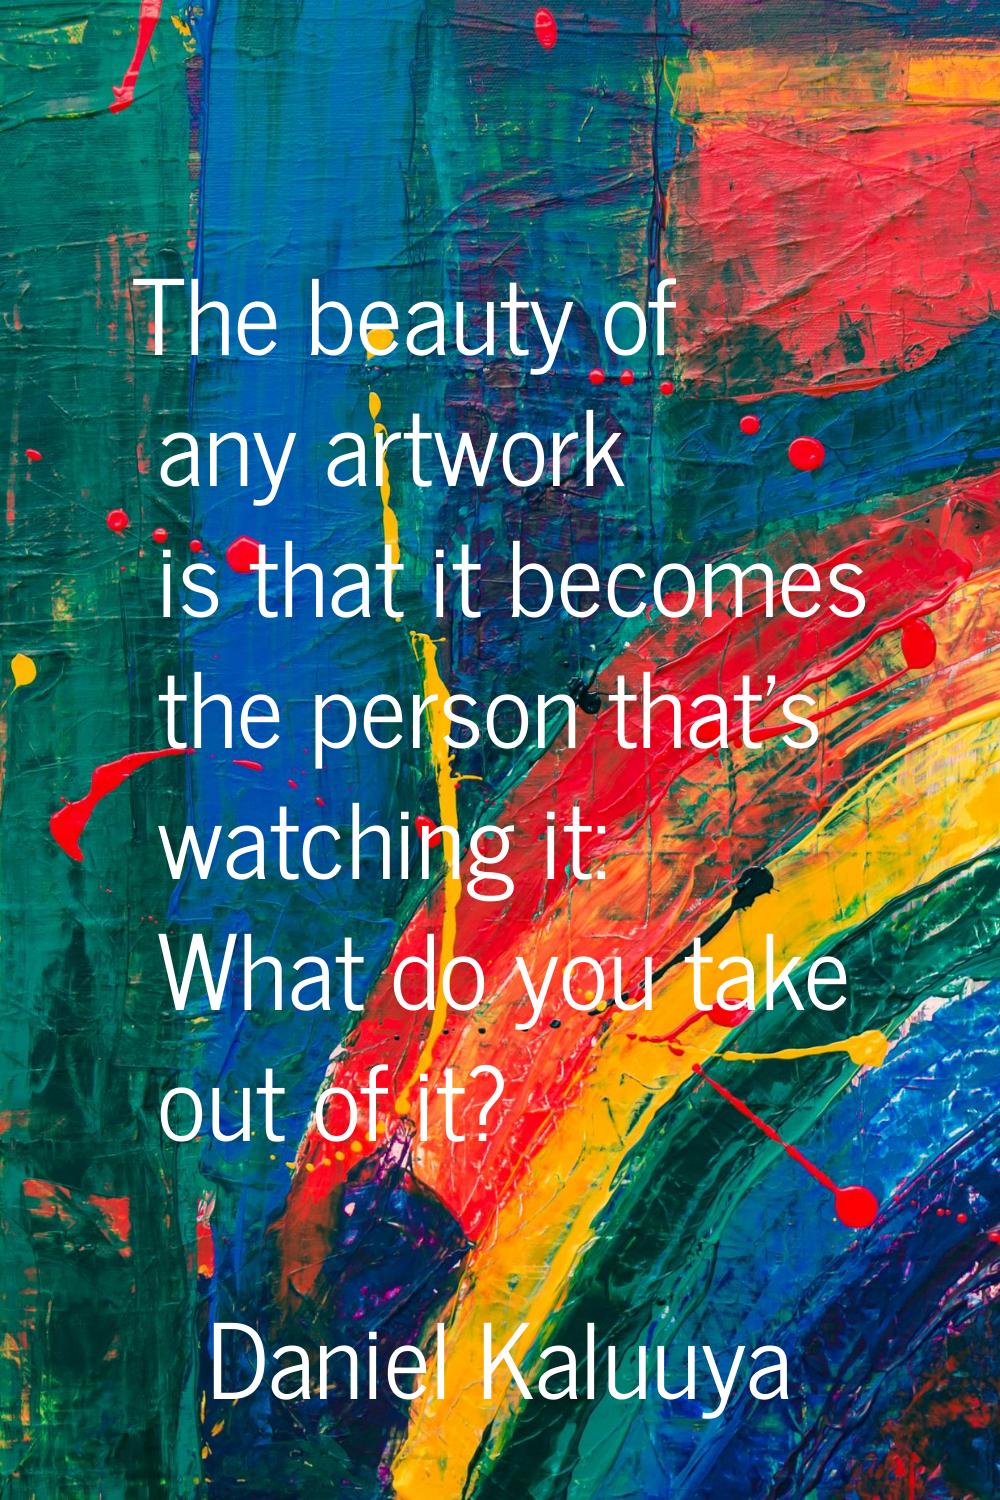 The beauty of any artwork is that it becomes the person that's watching it: What do you take out of